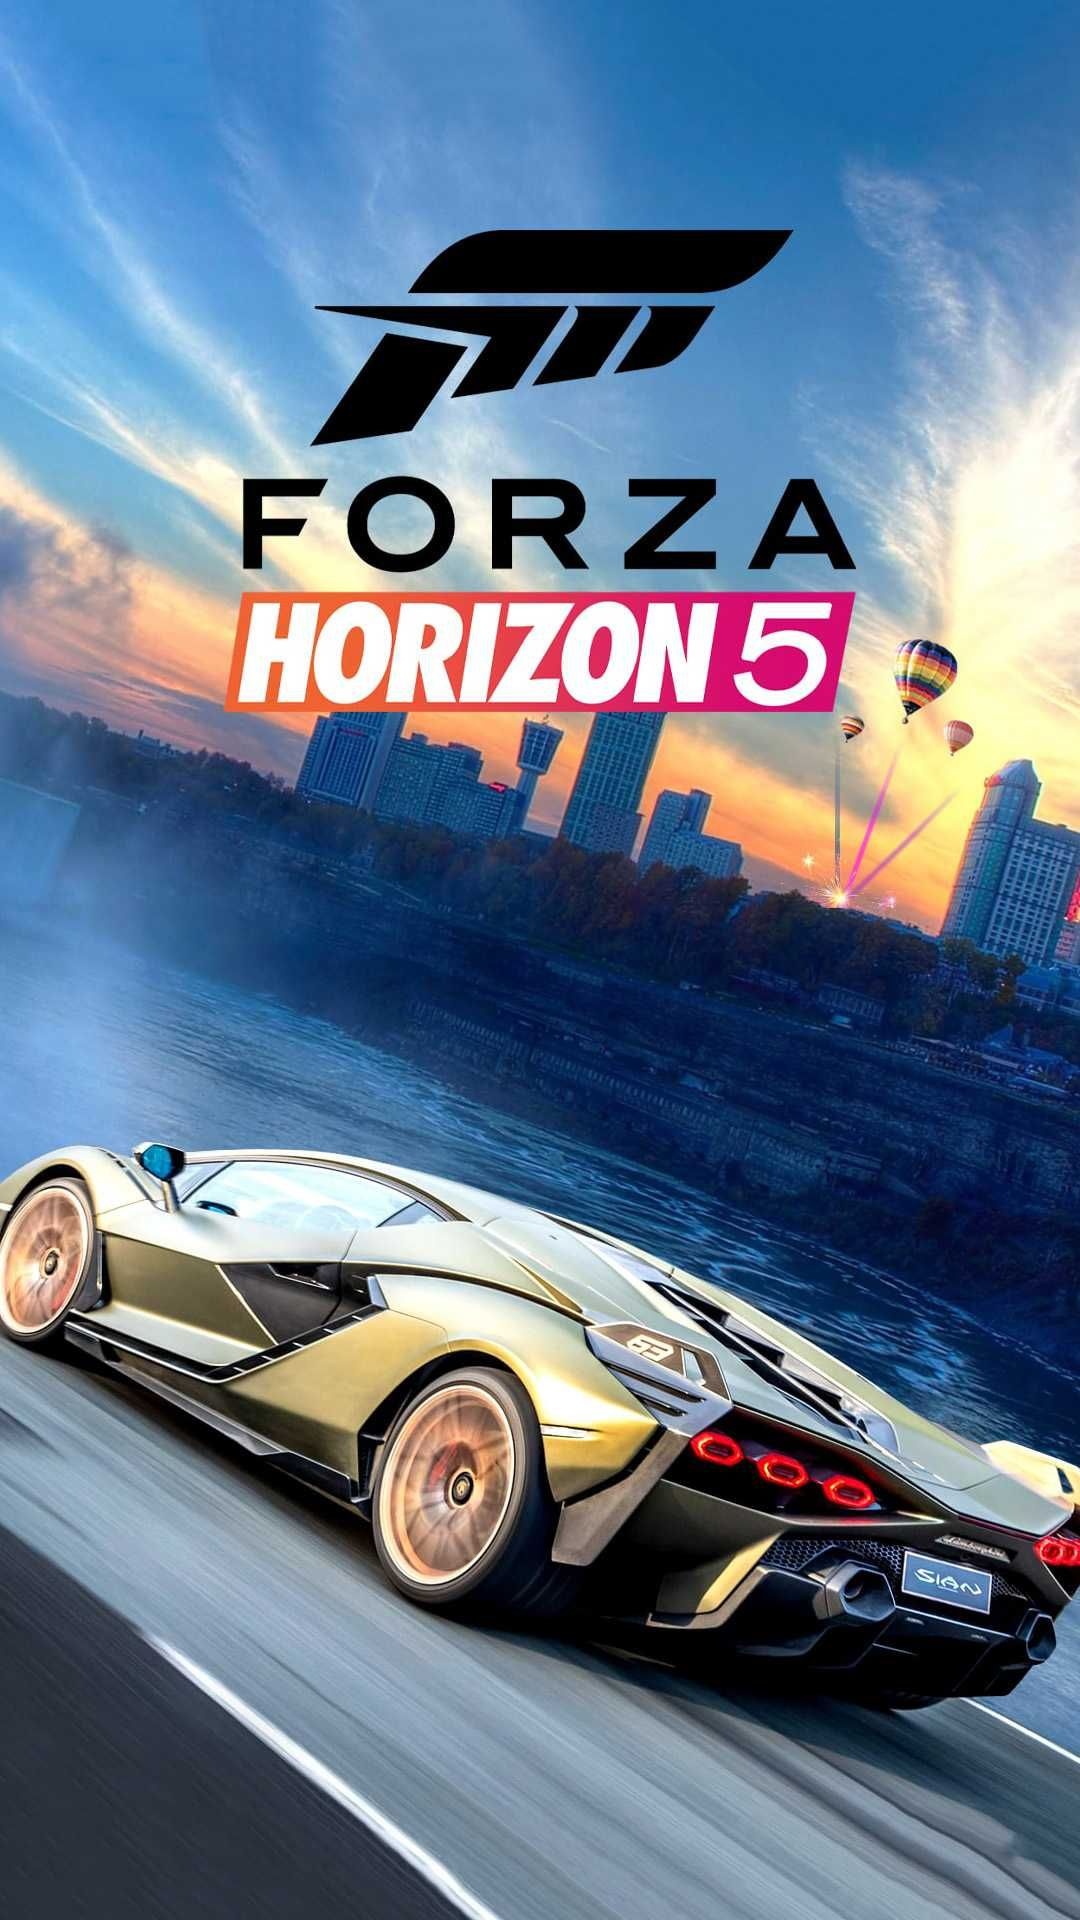 Forza Horizon 5 game, Thrilling racing experience, Next-level graphics, Exciting gameplay, 1080x1920 Full HD Handy